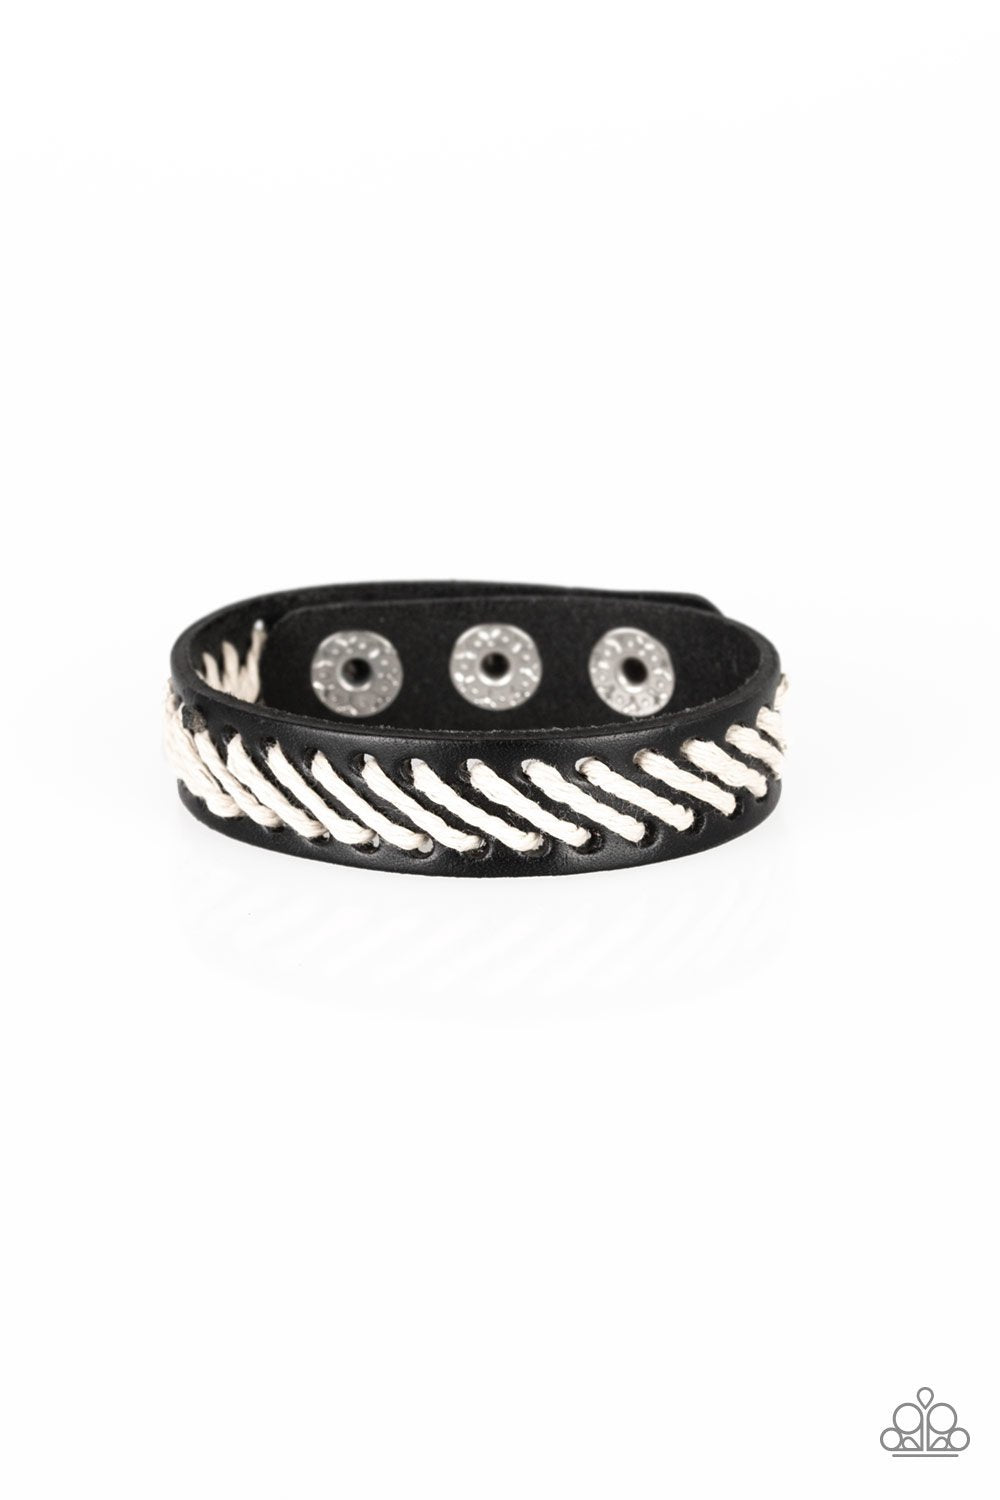 Watch Your BACKPACKER Black and White Urban Wrap Snap Bracelet - Paparazzi Accessories-CarasShop.com - $5 Jewelry by Cara Jewels